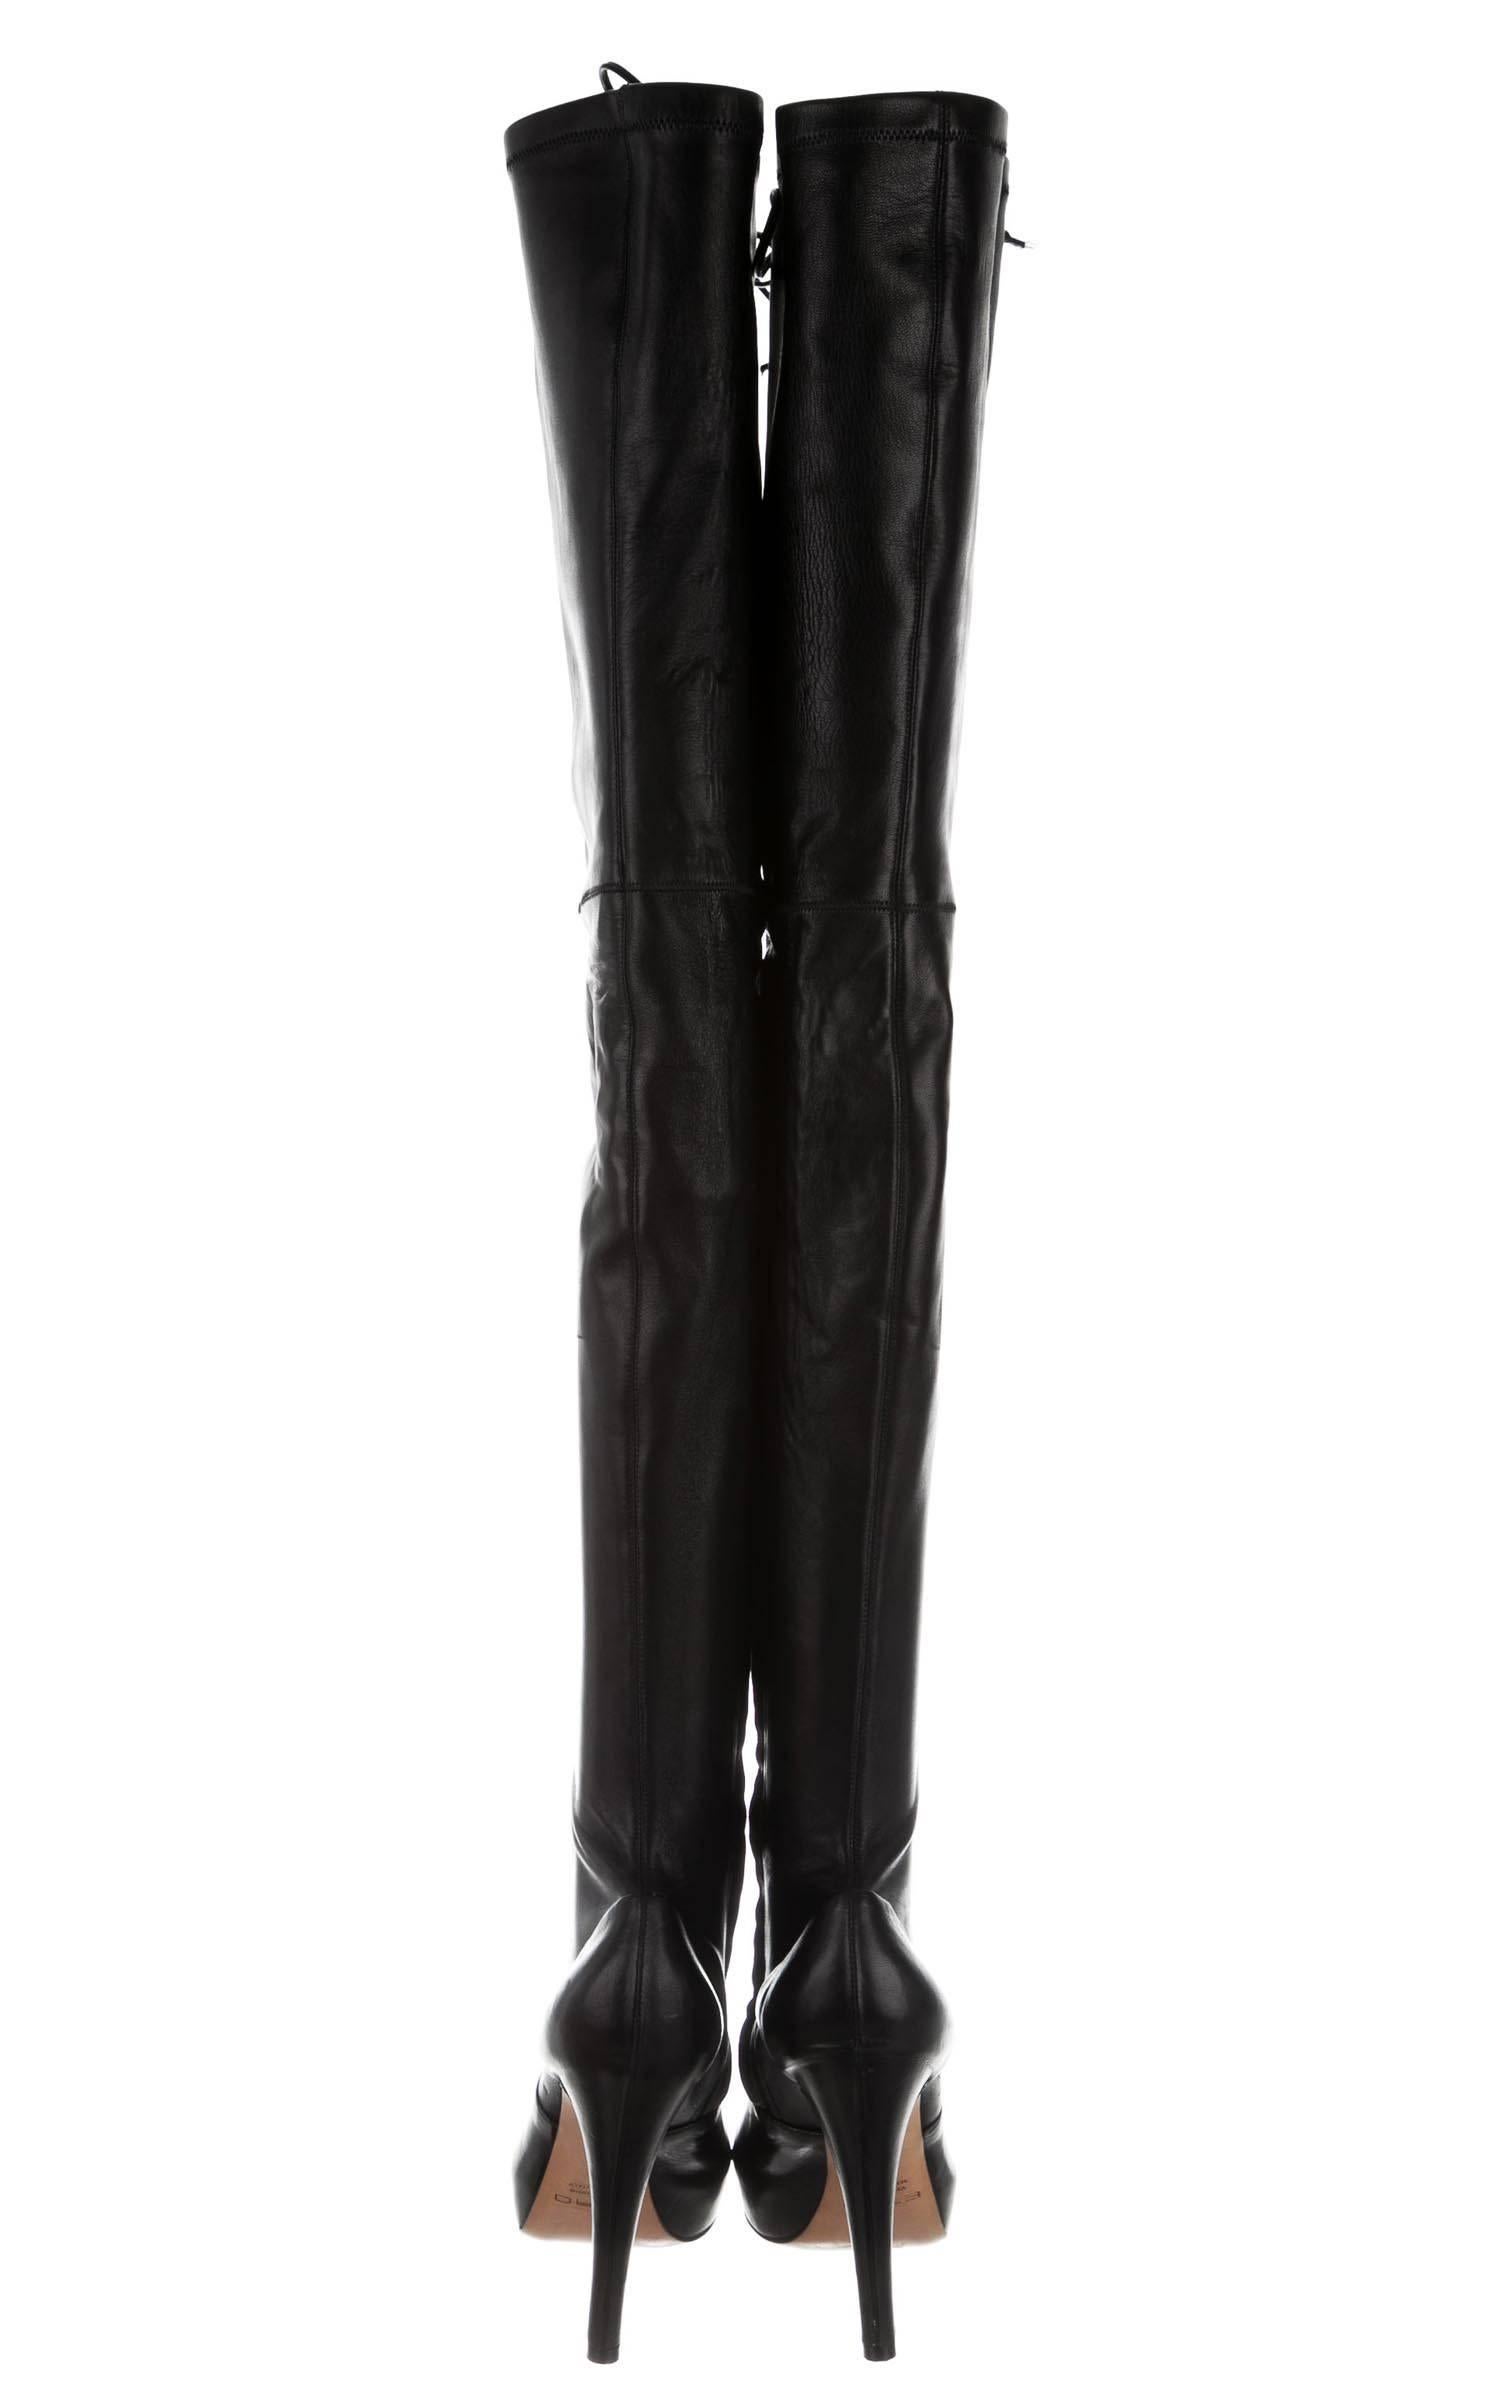 New ETRO Leather Lace-up Thigh-High Platform Black Hell Boots It.39 - US 9 1